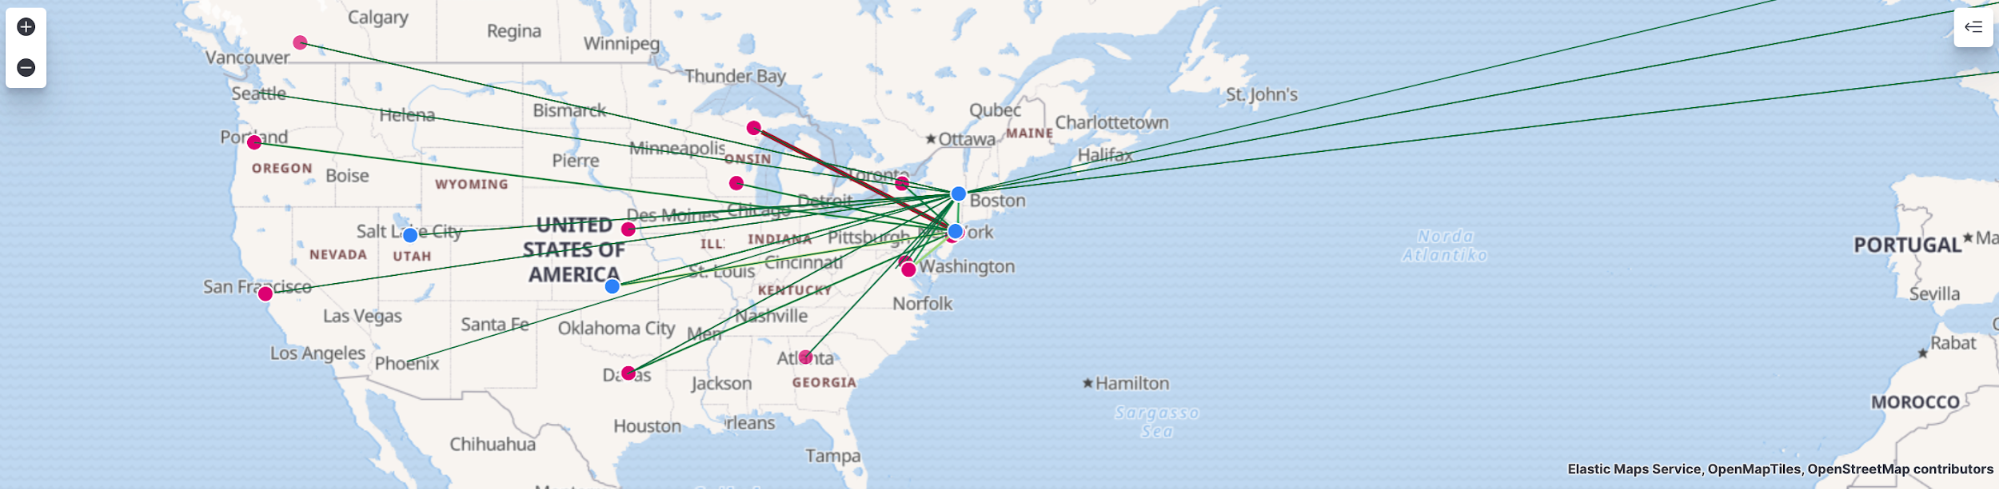 09_network-map-2.png